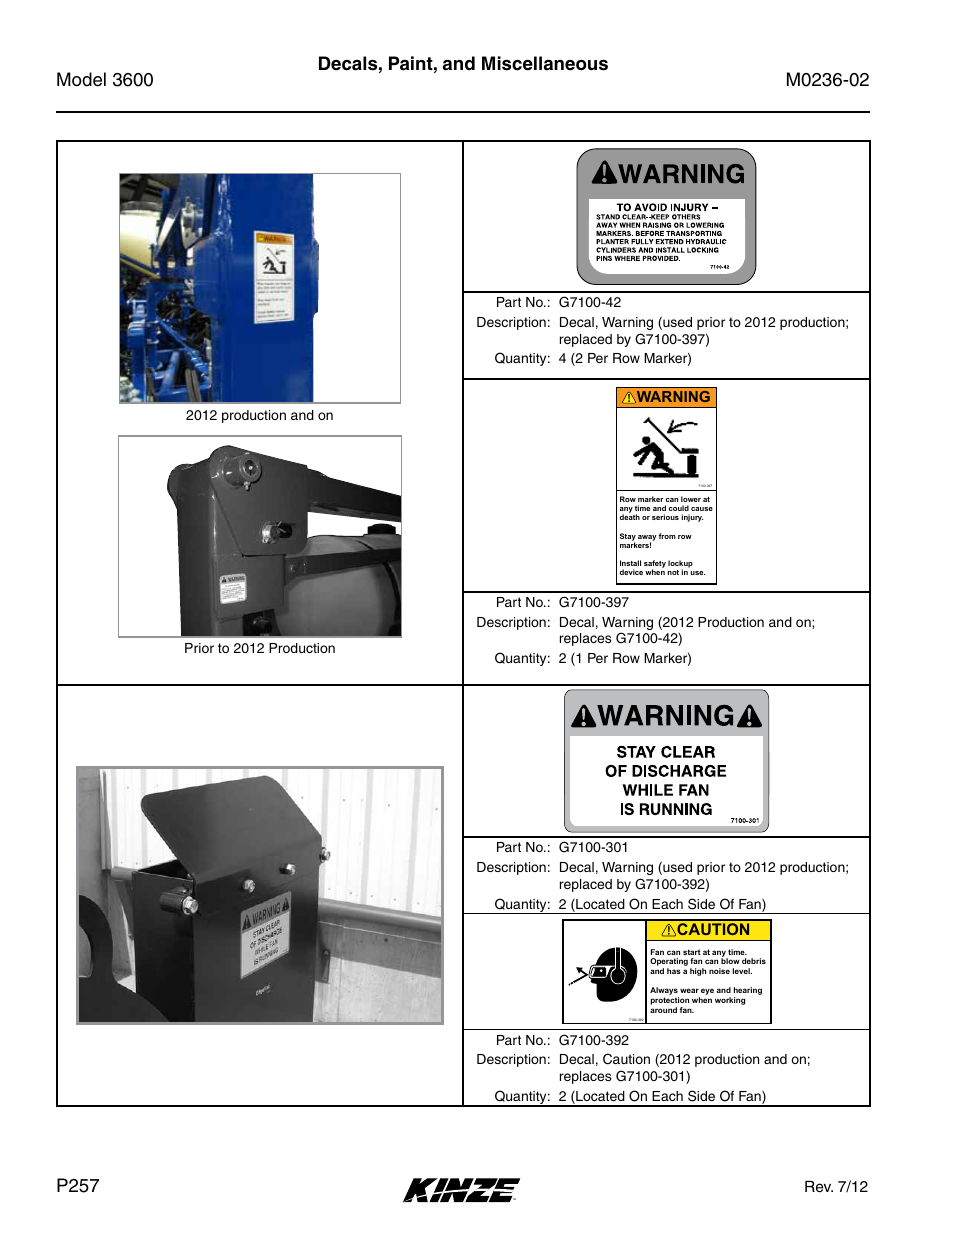 Decals, paint, and miscellaneous, Caution | Kinze 3600 Lift and Rotate Planter Rev. 5/14 User Manual | Page 260 / 302